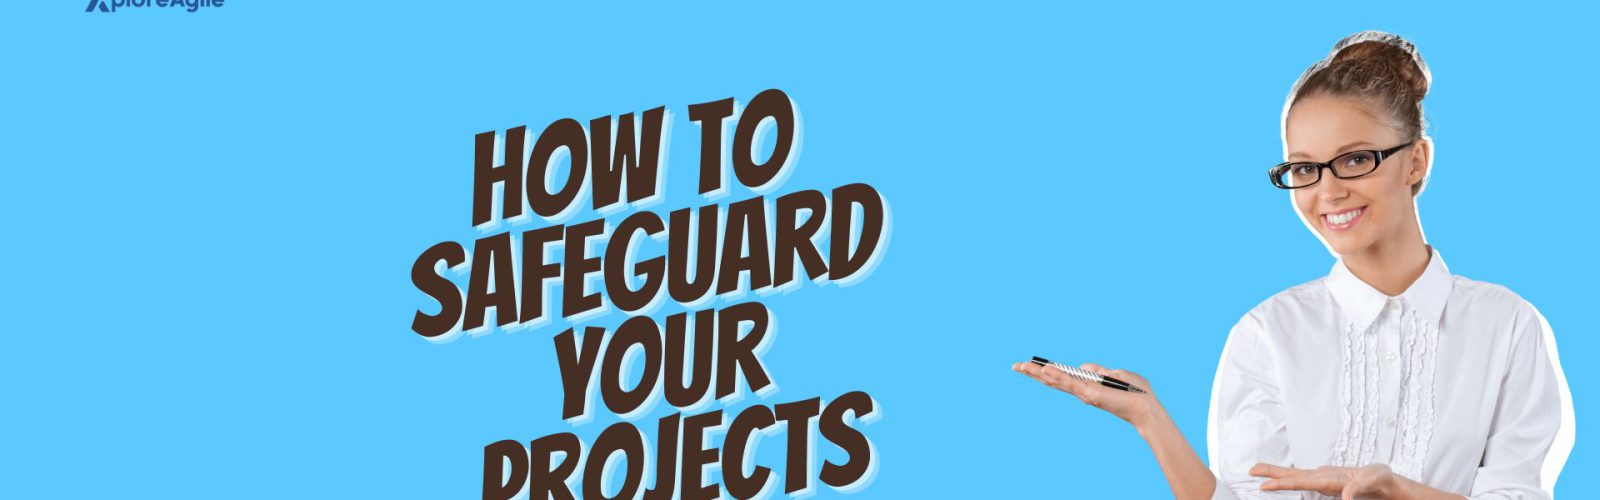 How to Safeguard Your Projects